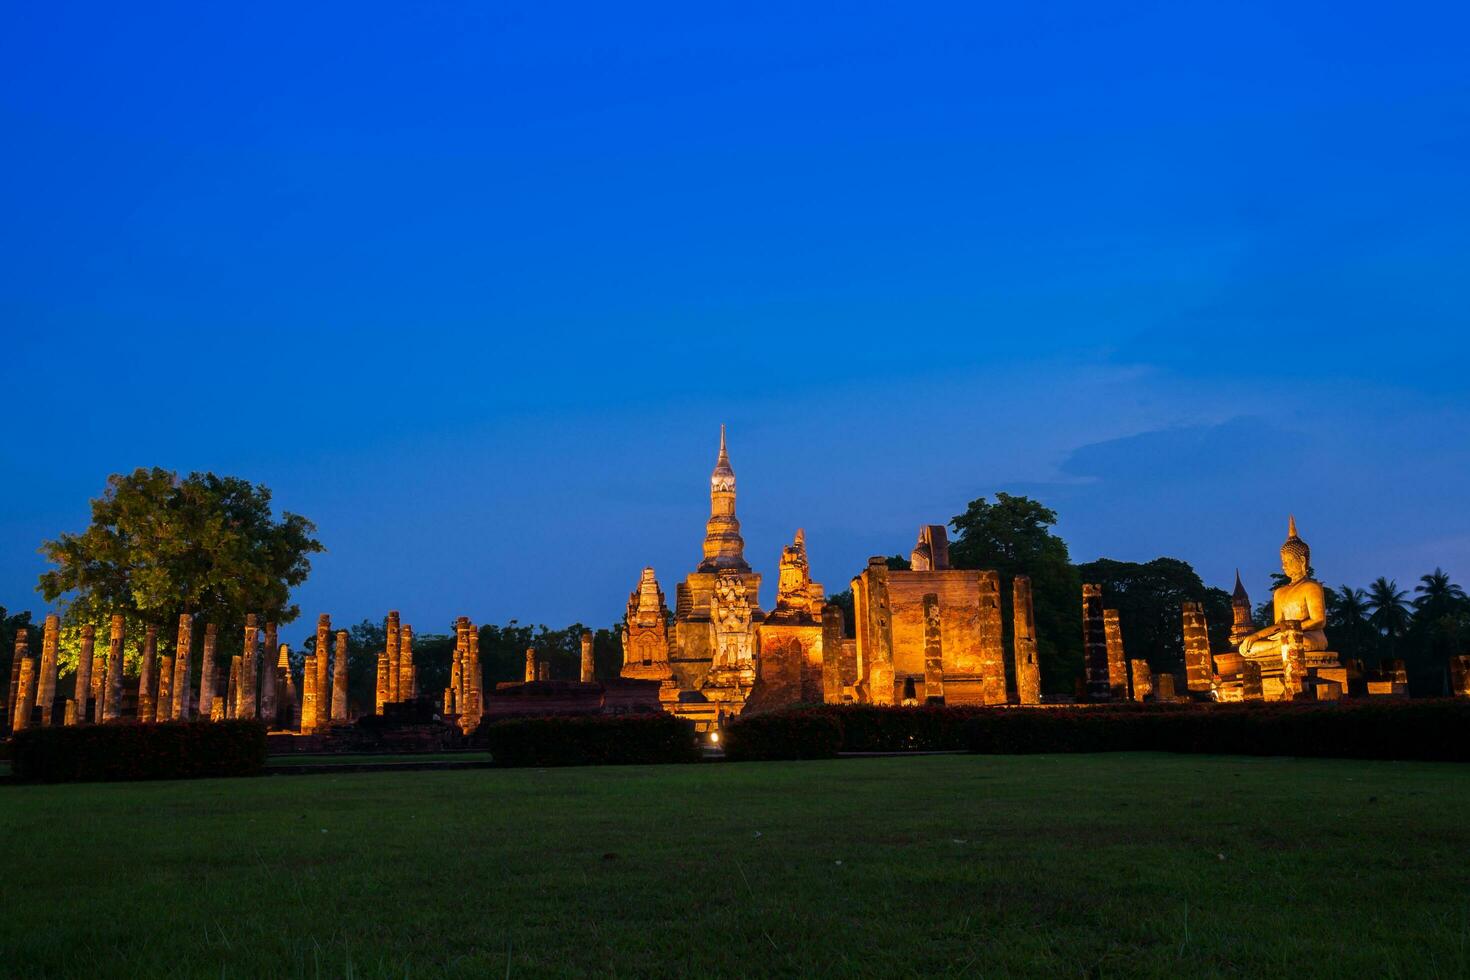 Thai stone castle a historical park at night time photo